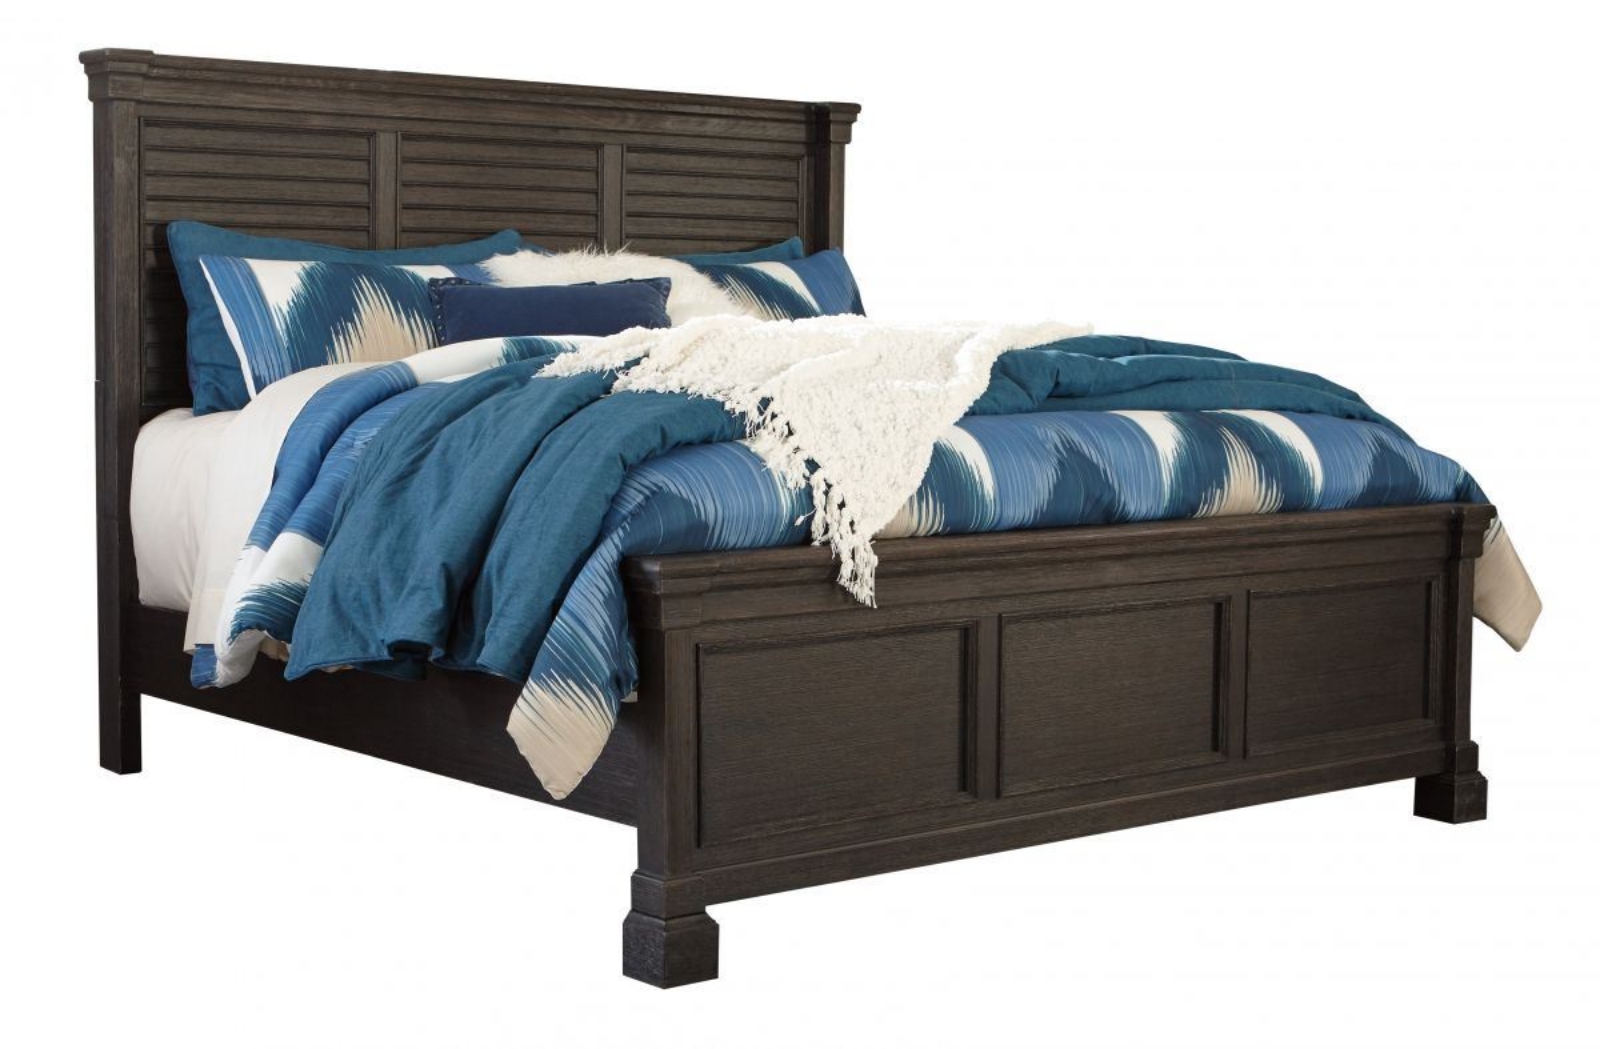 Picture of Tyler Creek King Size Bed